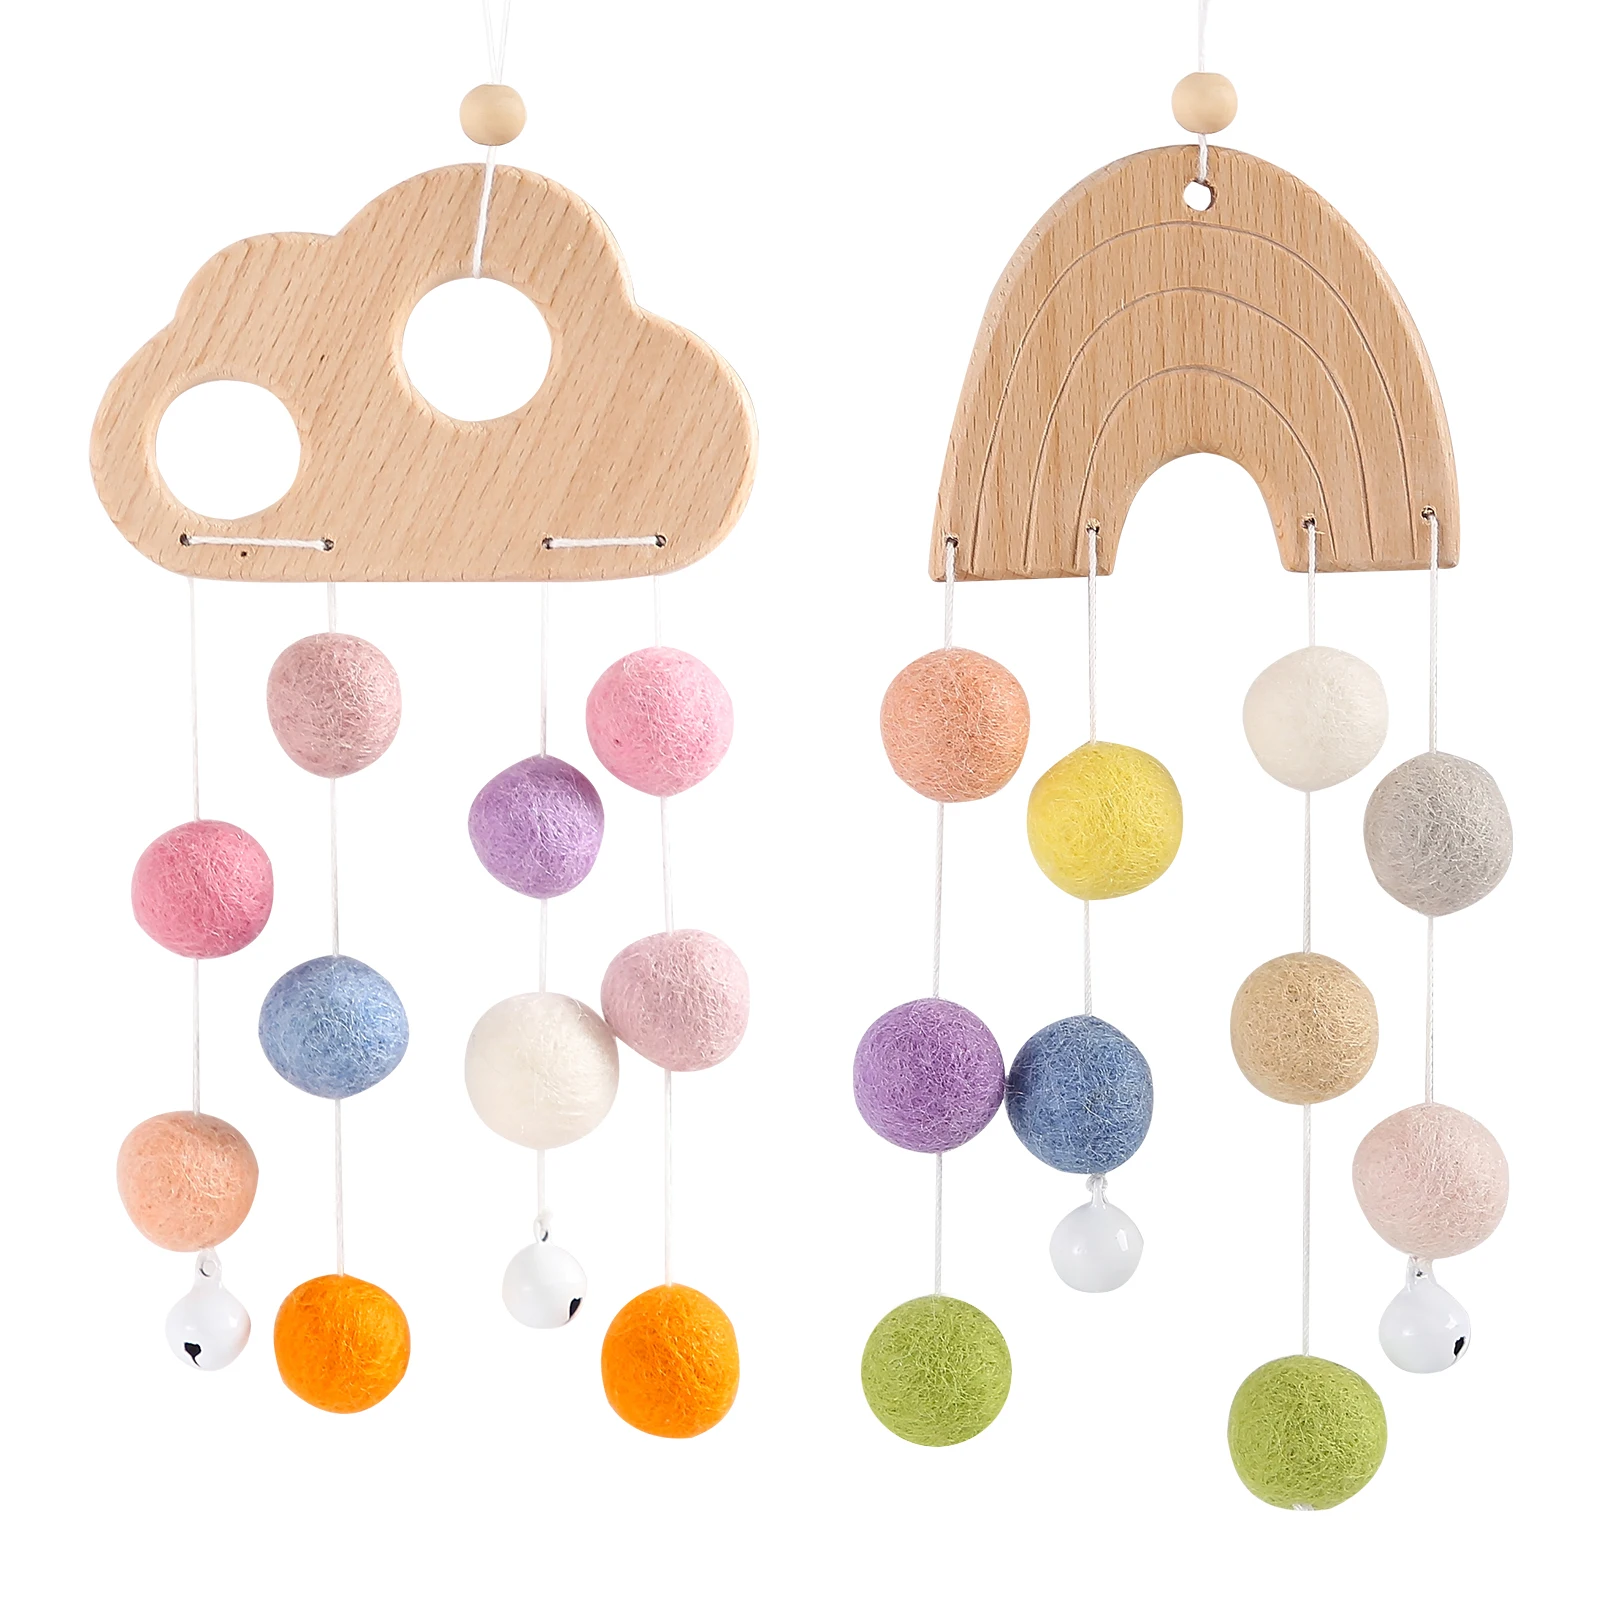 

Wooden Babies Bed Bell Toys Assembly Rattles Bracket Newborns Bracket Mobile Hanging Rattles Toy Sheep Doll for Kids Gifts